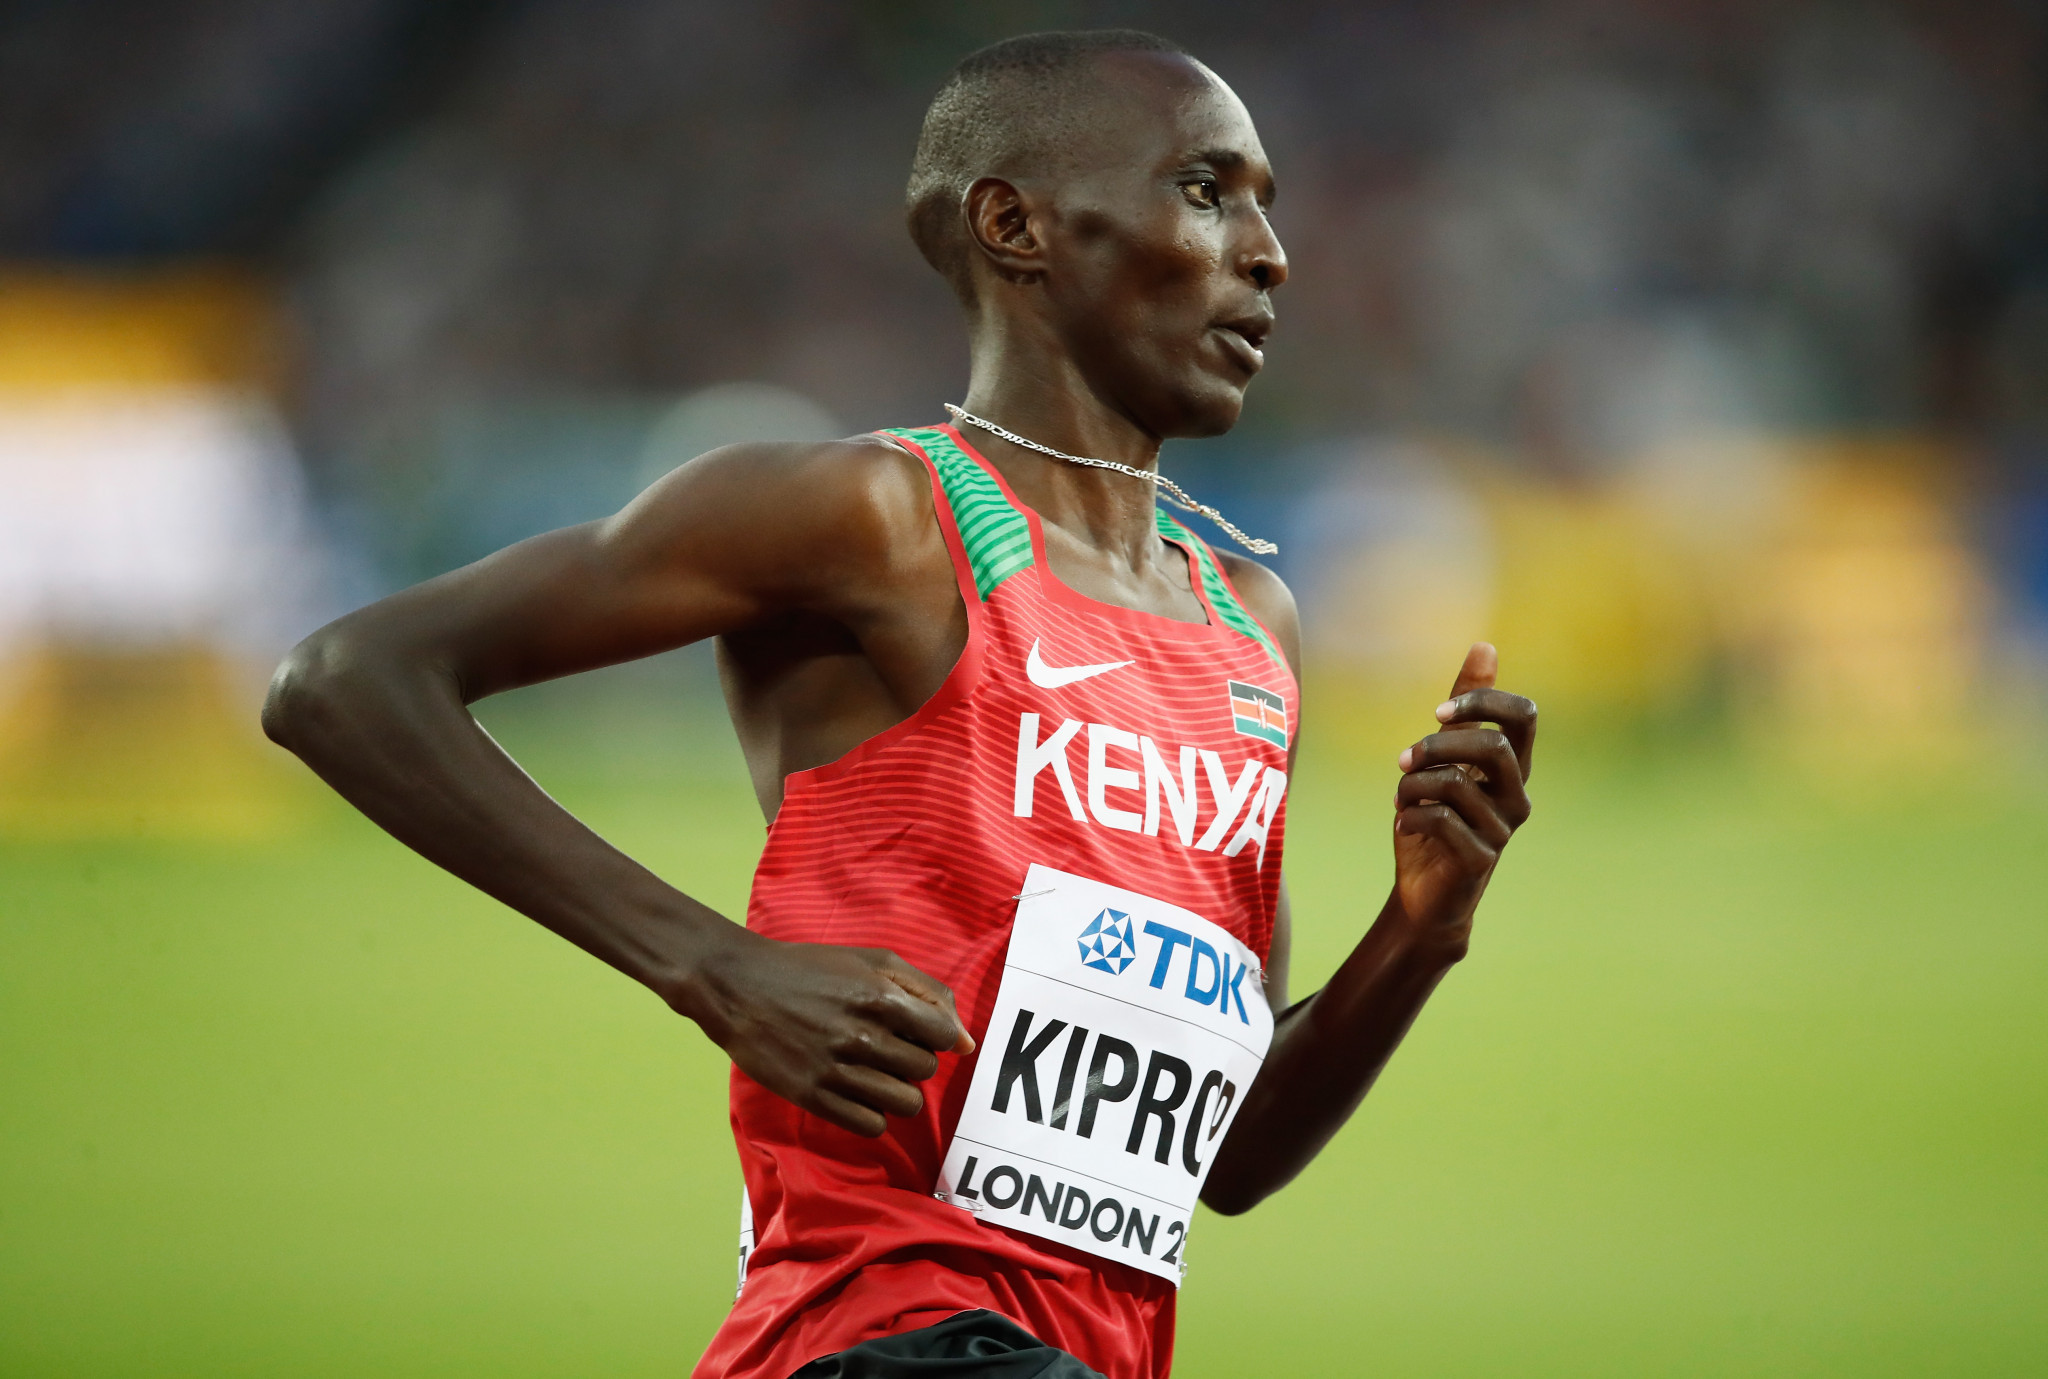 Asbel Kiprop is one of numerous Kenyan stars to have been embroiled in doping controversies in recent years ©Getty Images